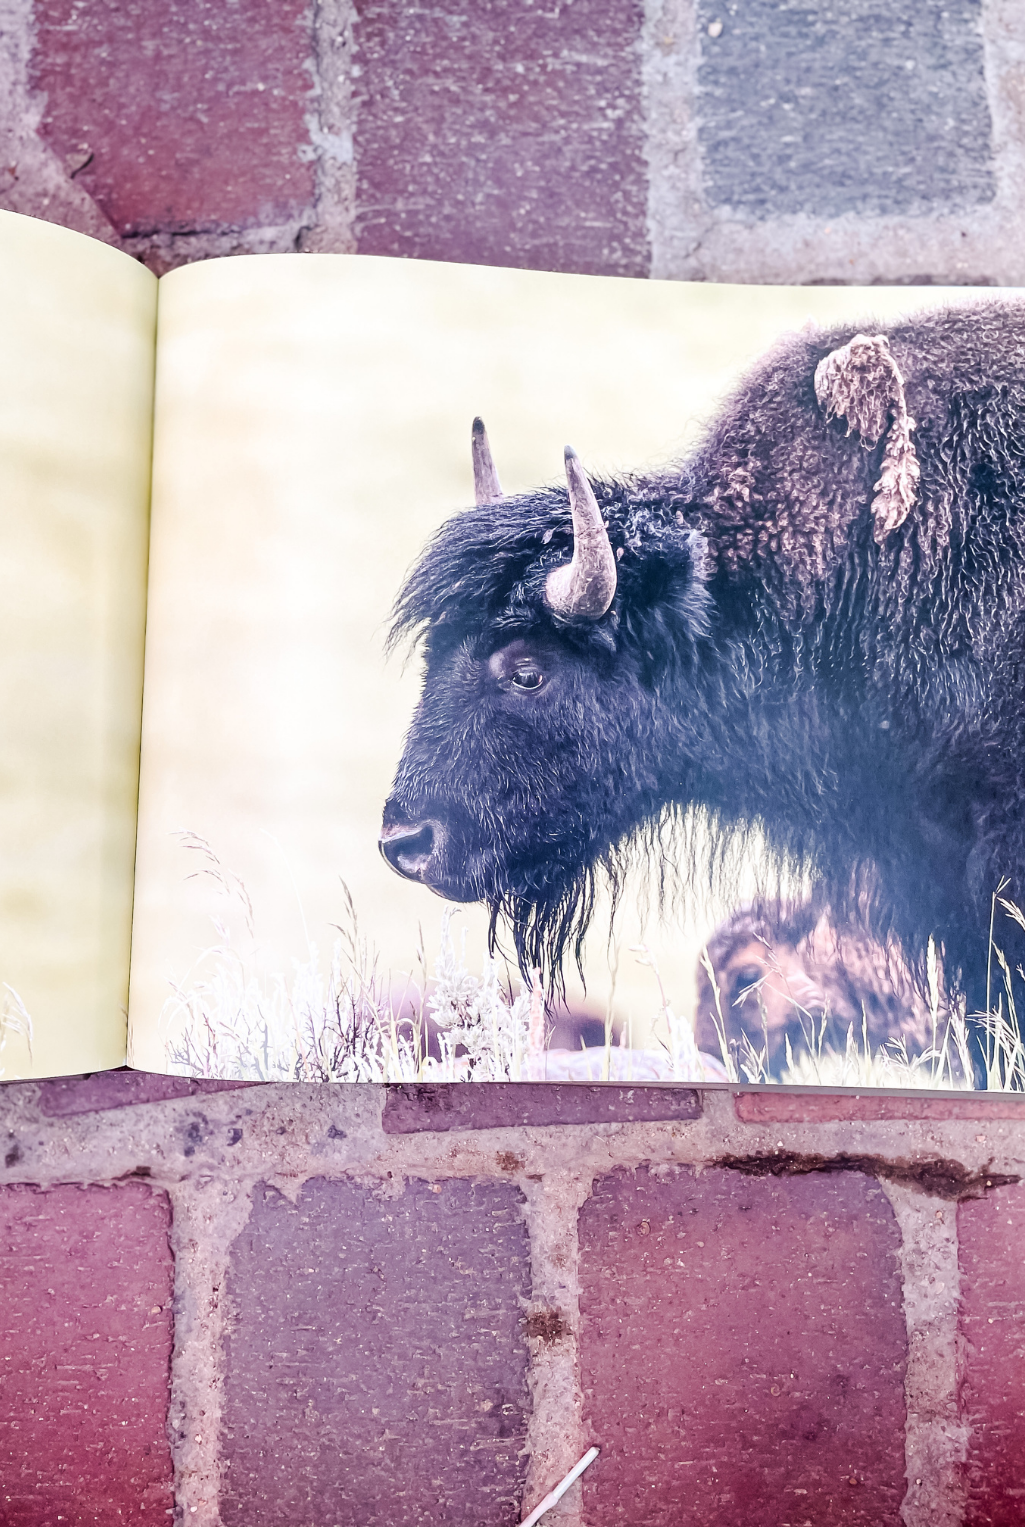 Bison - Portrait Of An Icon Book